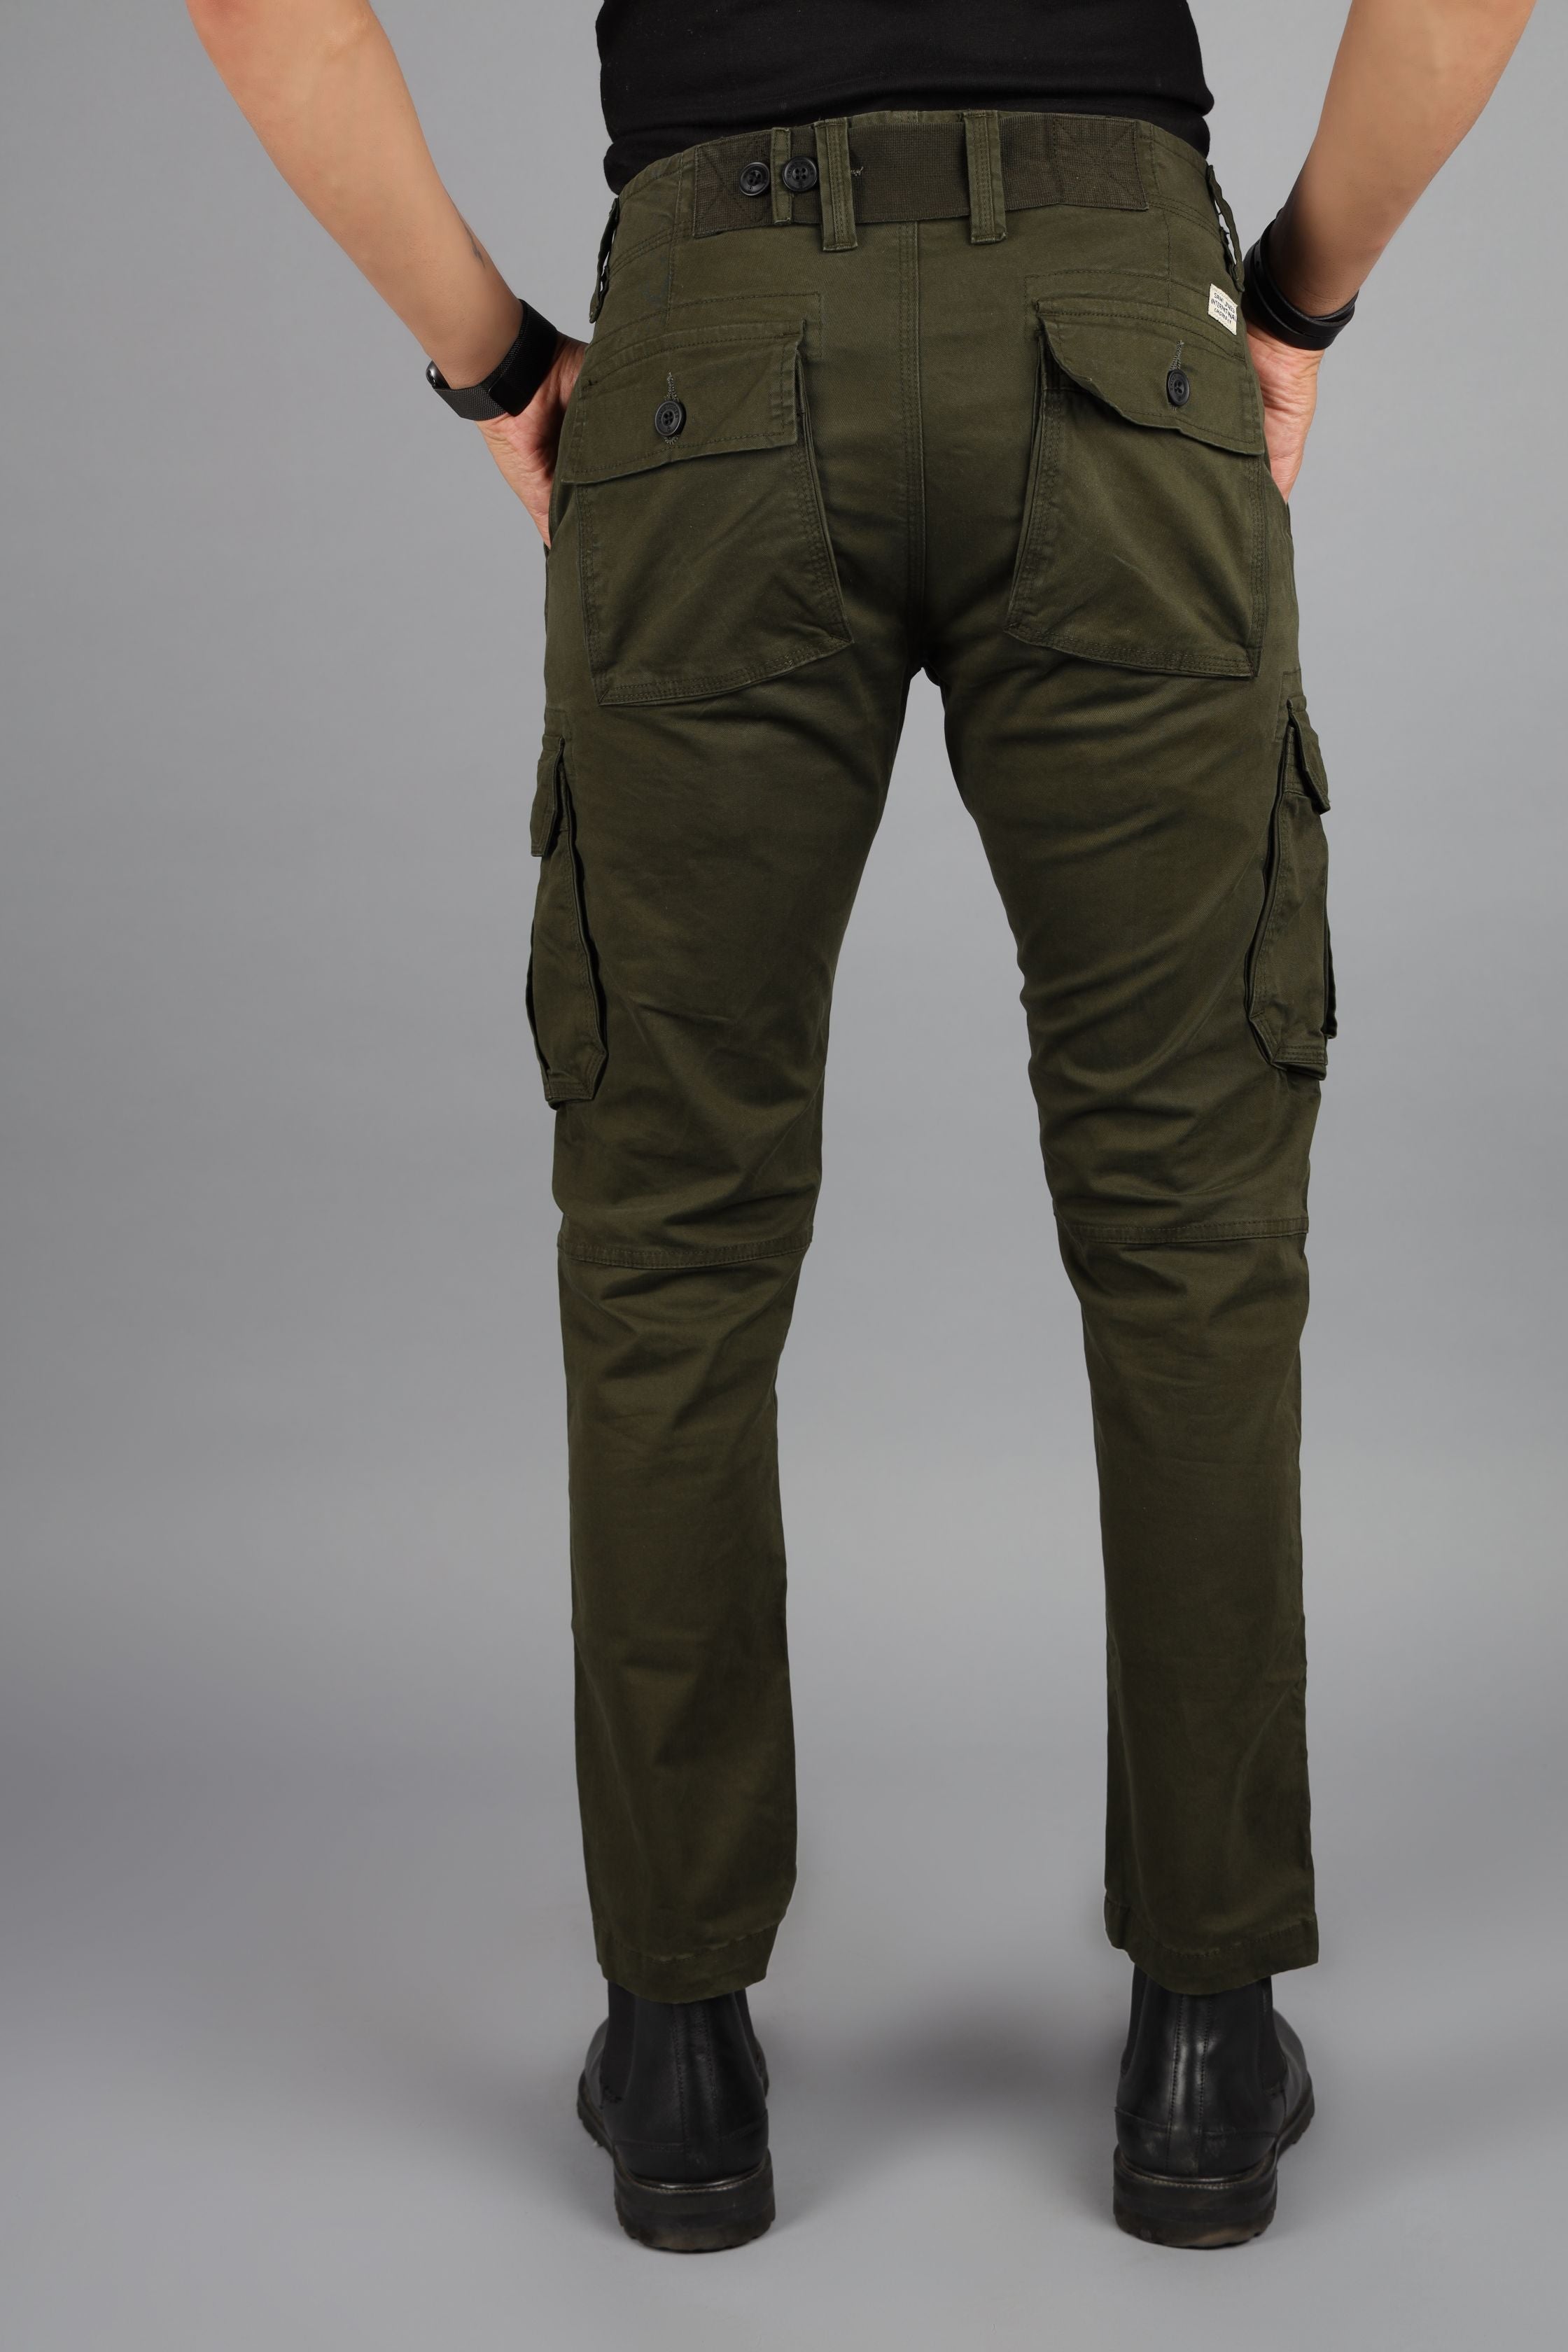 UM10296 Forest Green Mini-Ripstop Corrections Cargo Trousers - Cal Uniforms